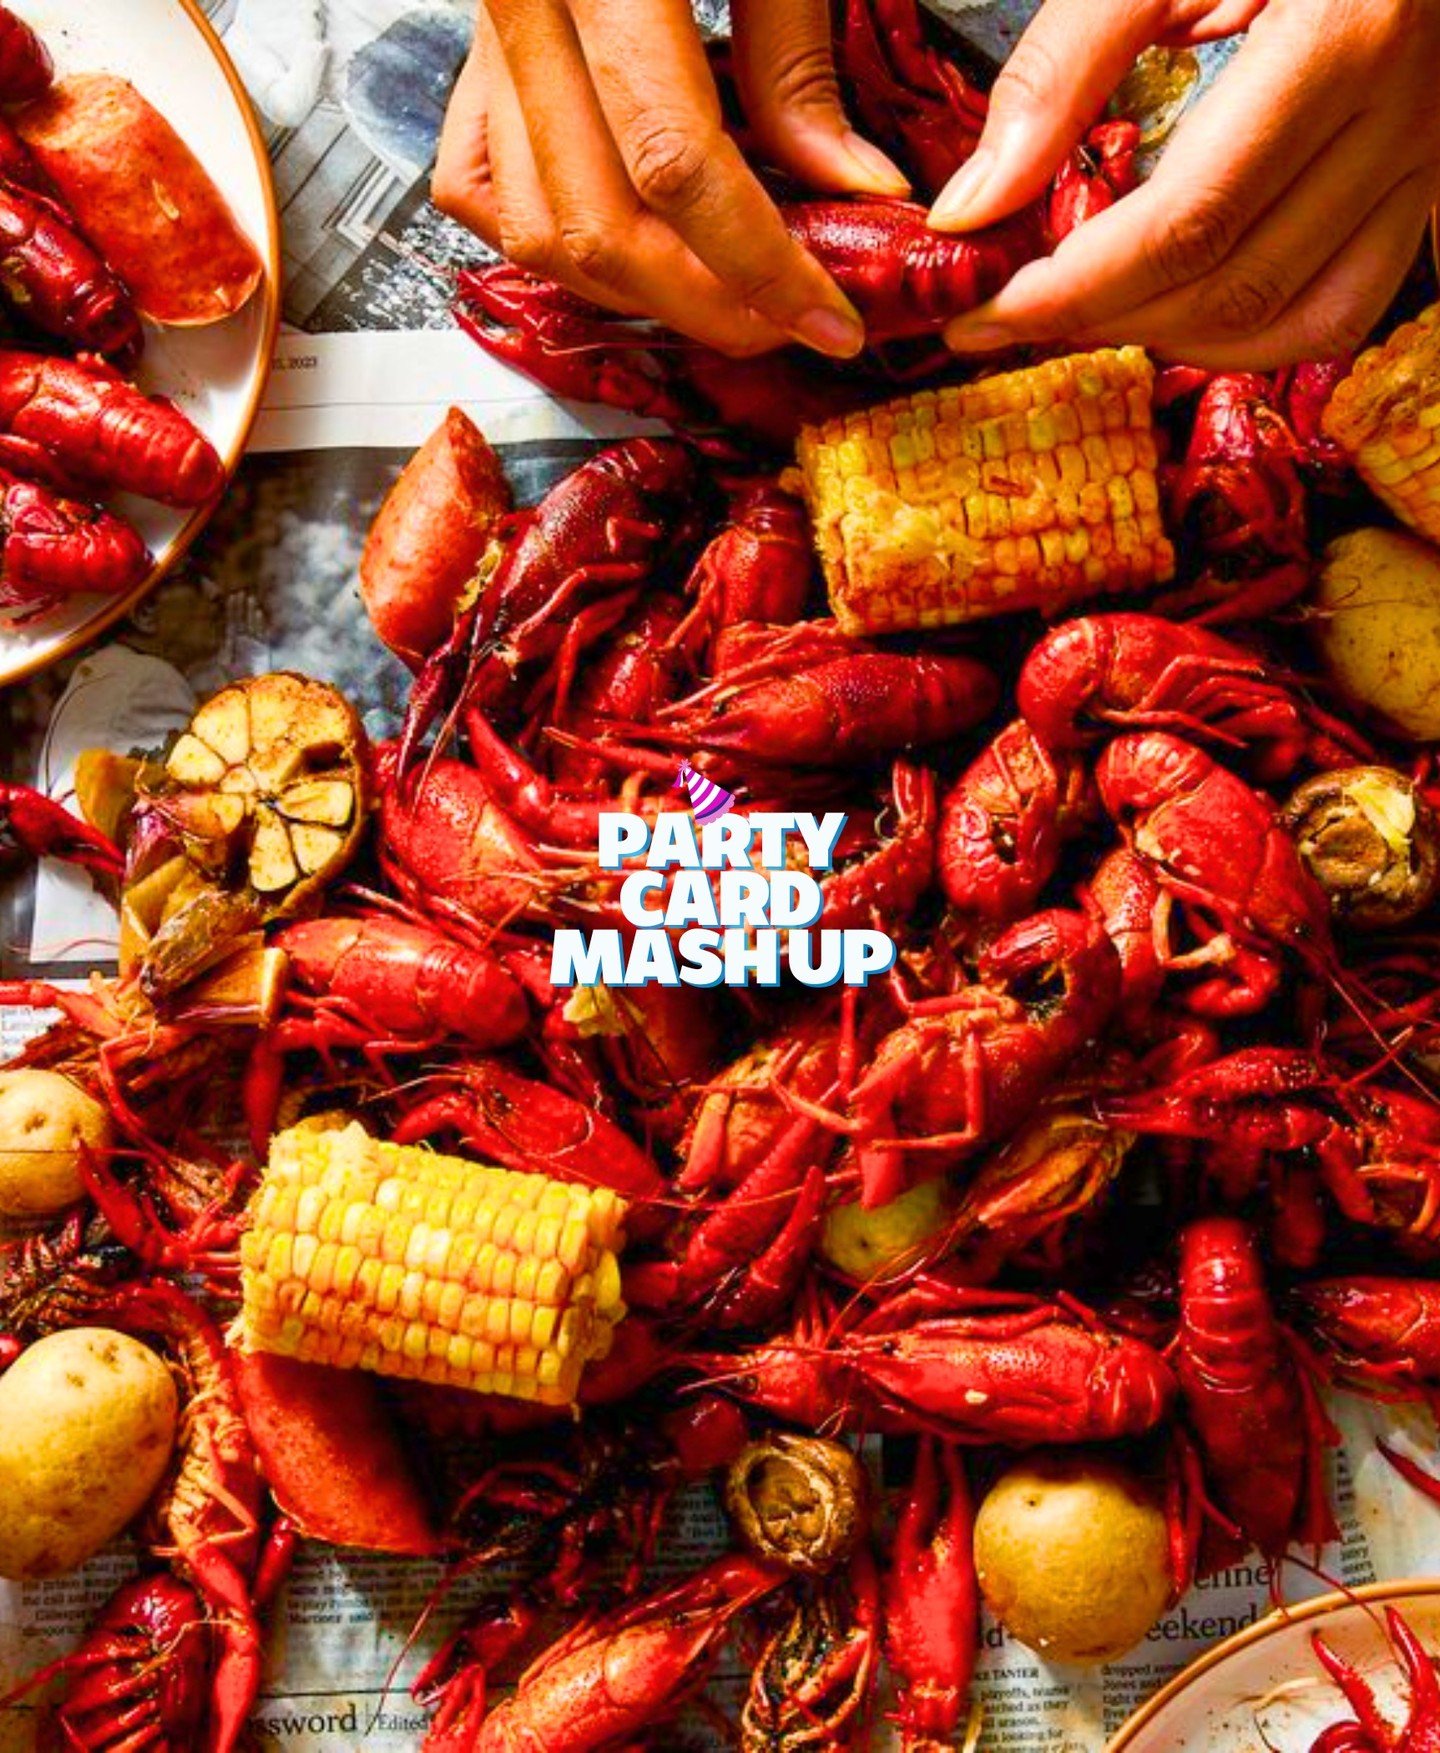 Where we are from, crawfish boils are a way of life! The crawfish season is starting to wind down but that does not mean the Party Card Mash Up season is over! 

Graduations are around the corner so grab your game/s which make for great graduations g